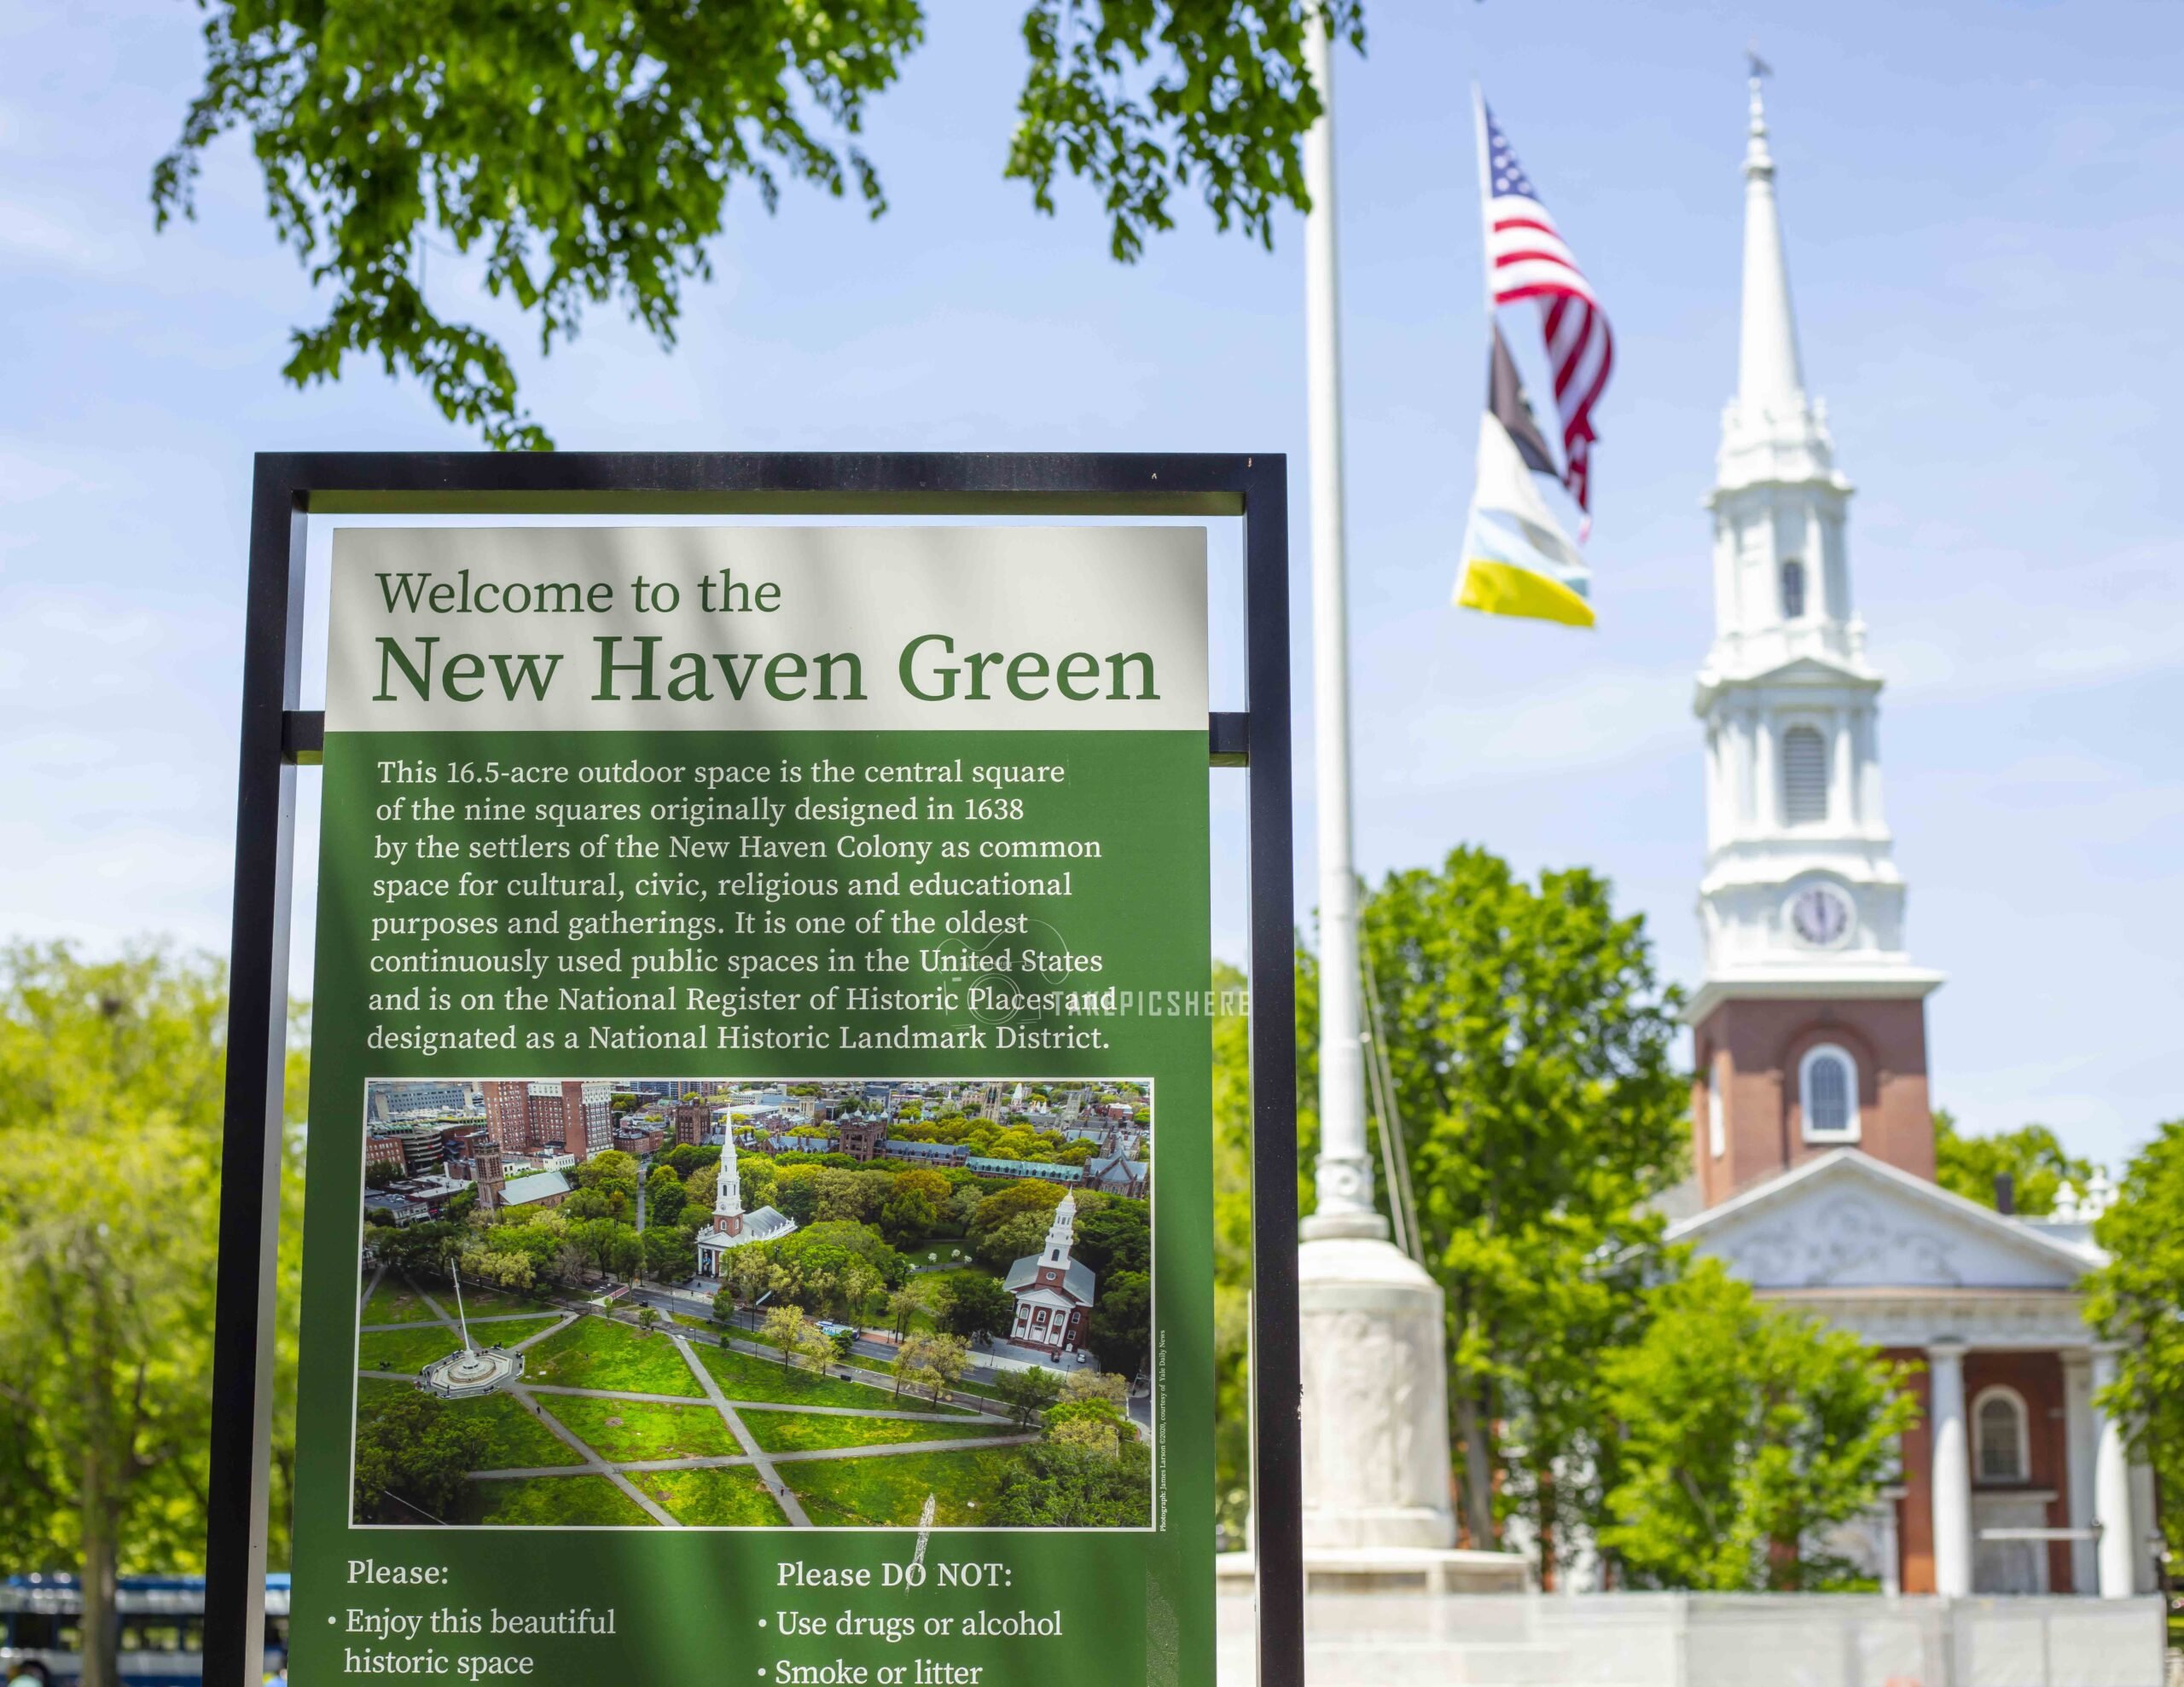 Welcome to New Haven Sign with Church in BG. Photo Taken by Lance Long of LongShots Media